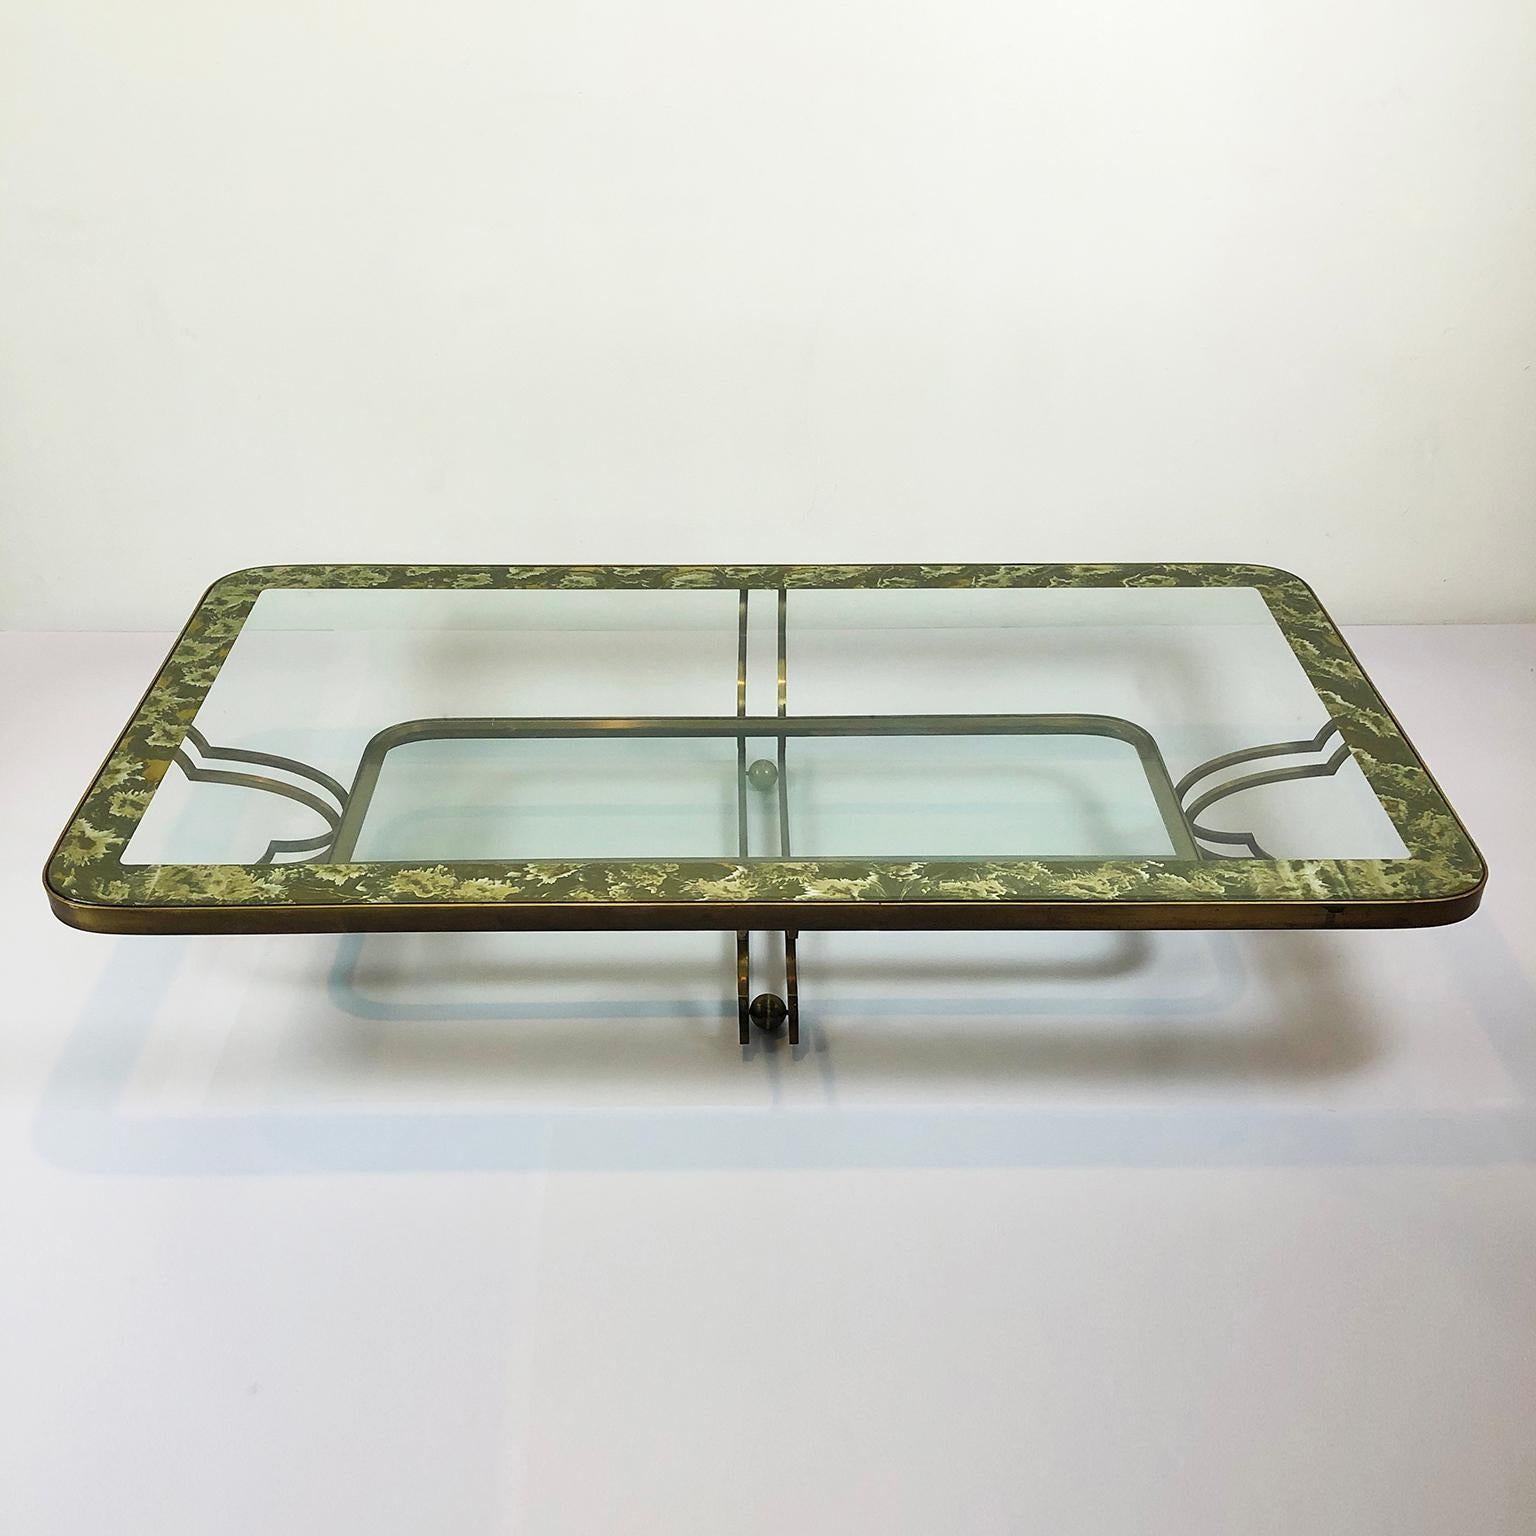 We offer these set of bronze side tables and center table designed by Arturo Pani circa 1950s, the designer used patinated bronze in contrast with glass and antiqued églomisé mirror for these creations.